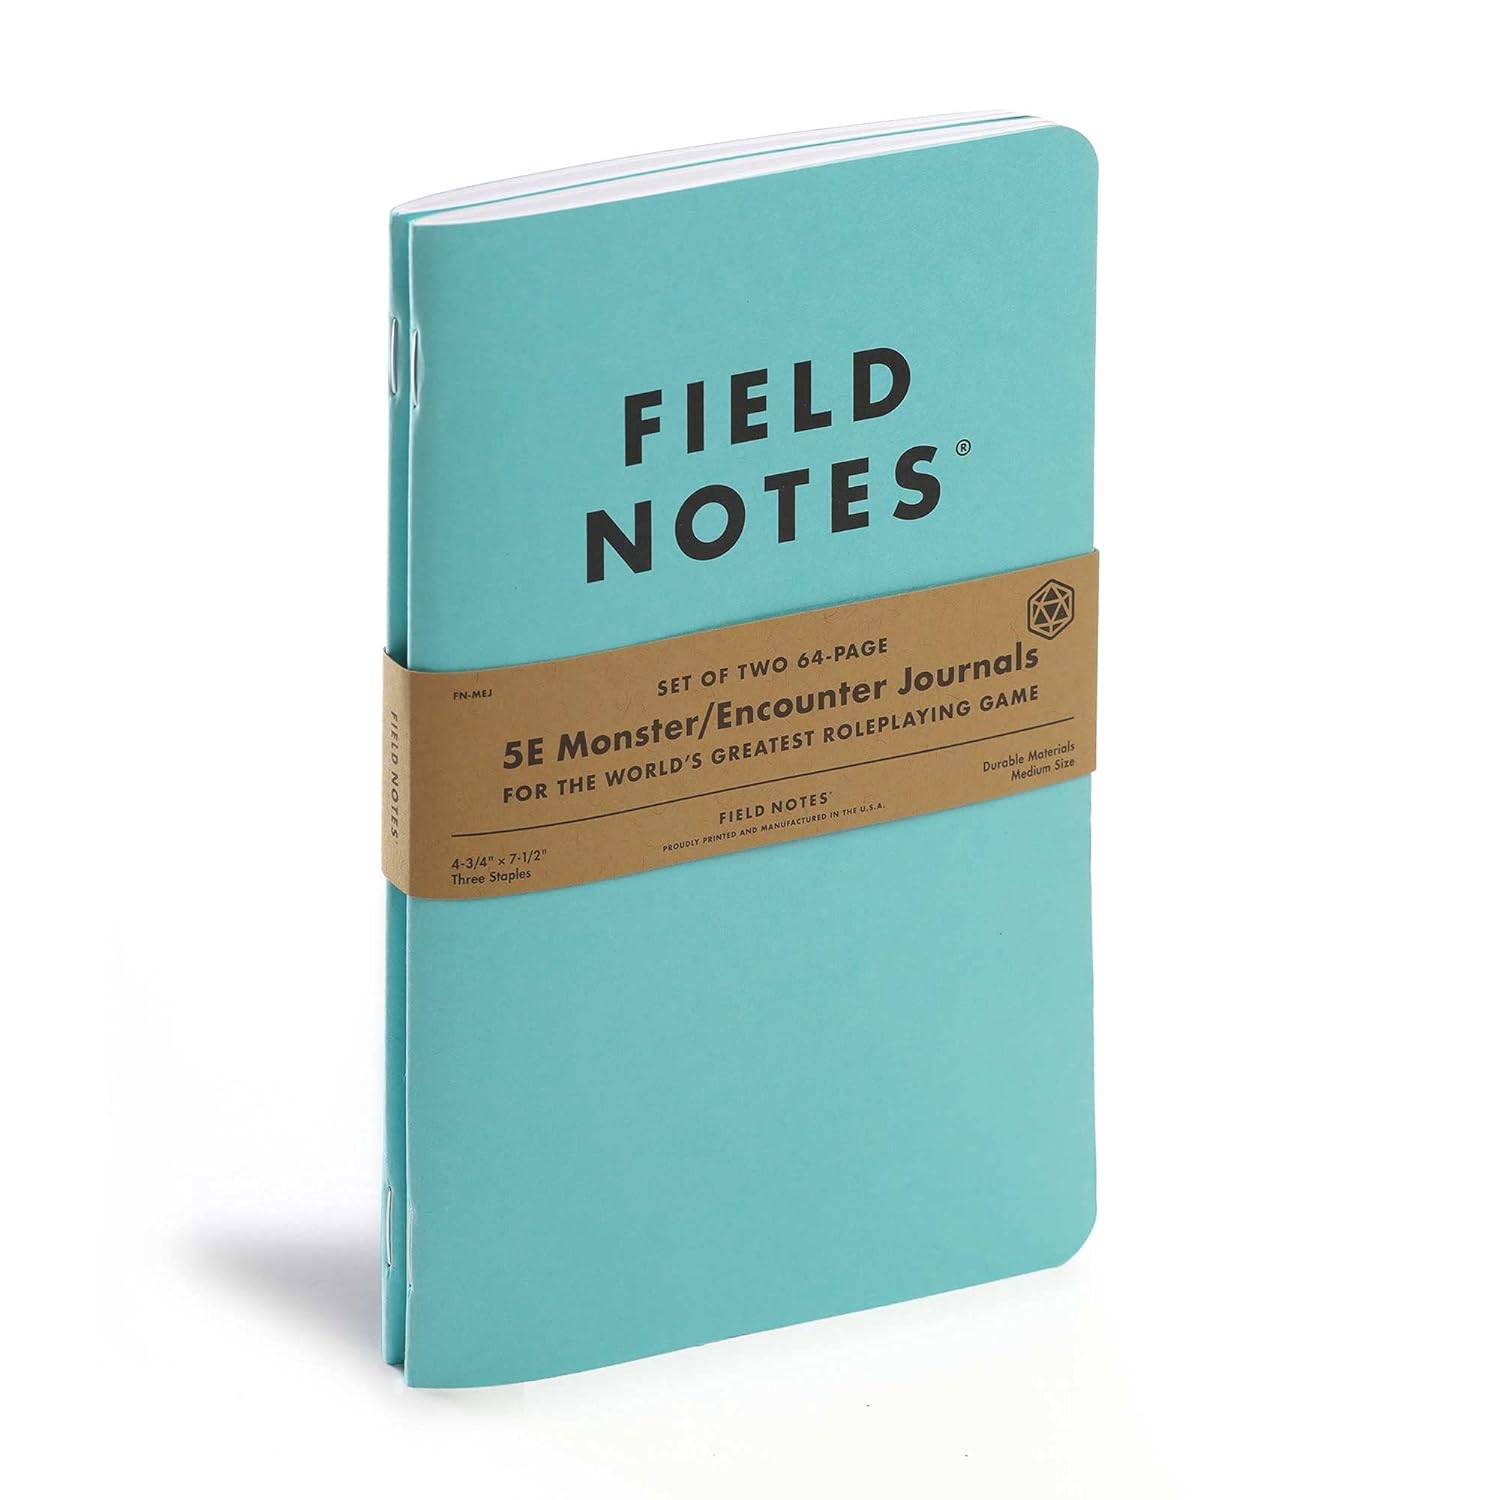 Field Notes 5E Monster/ Encounter Journals - Blesket Canada